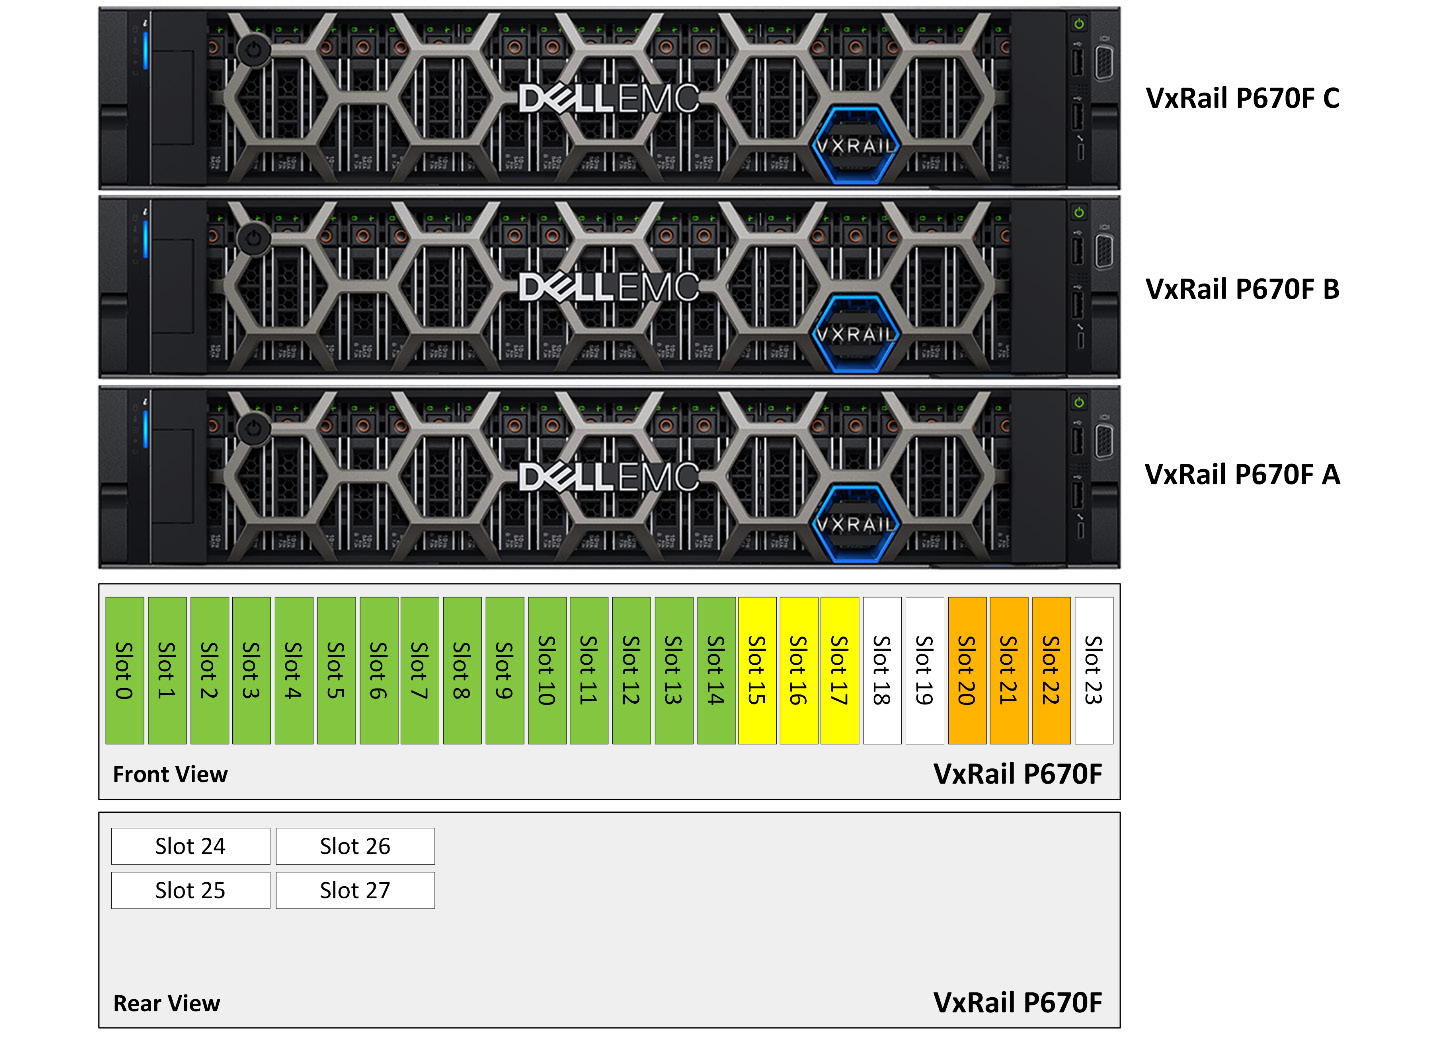 Figure 5.12 – Unsupported disk group configuration in VxRail P670F
